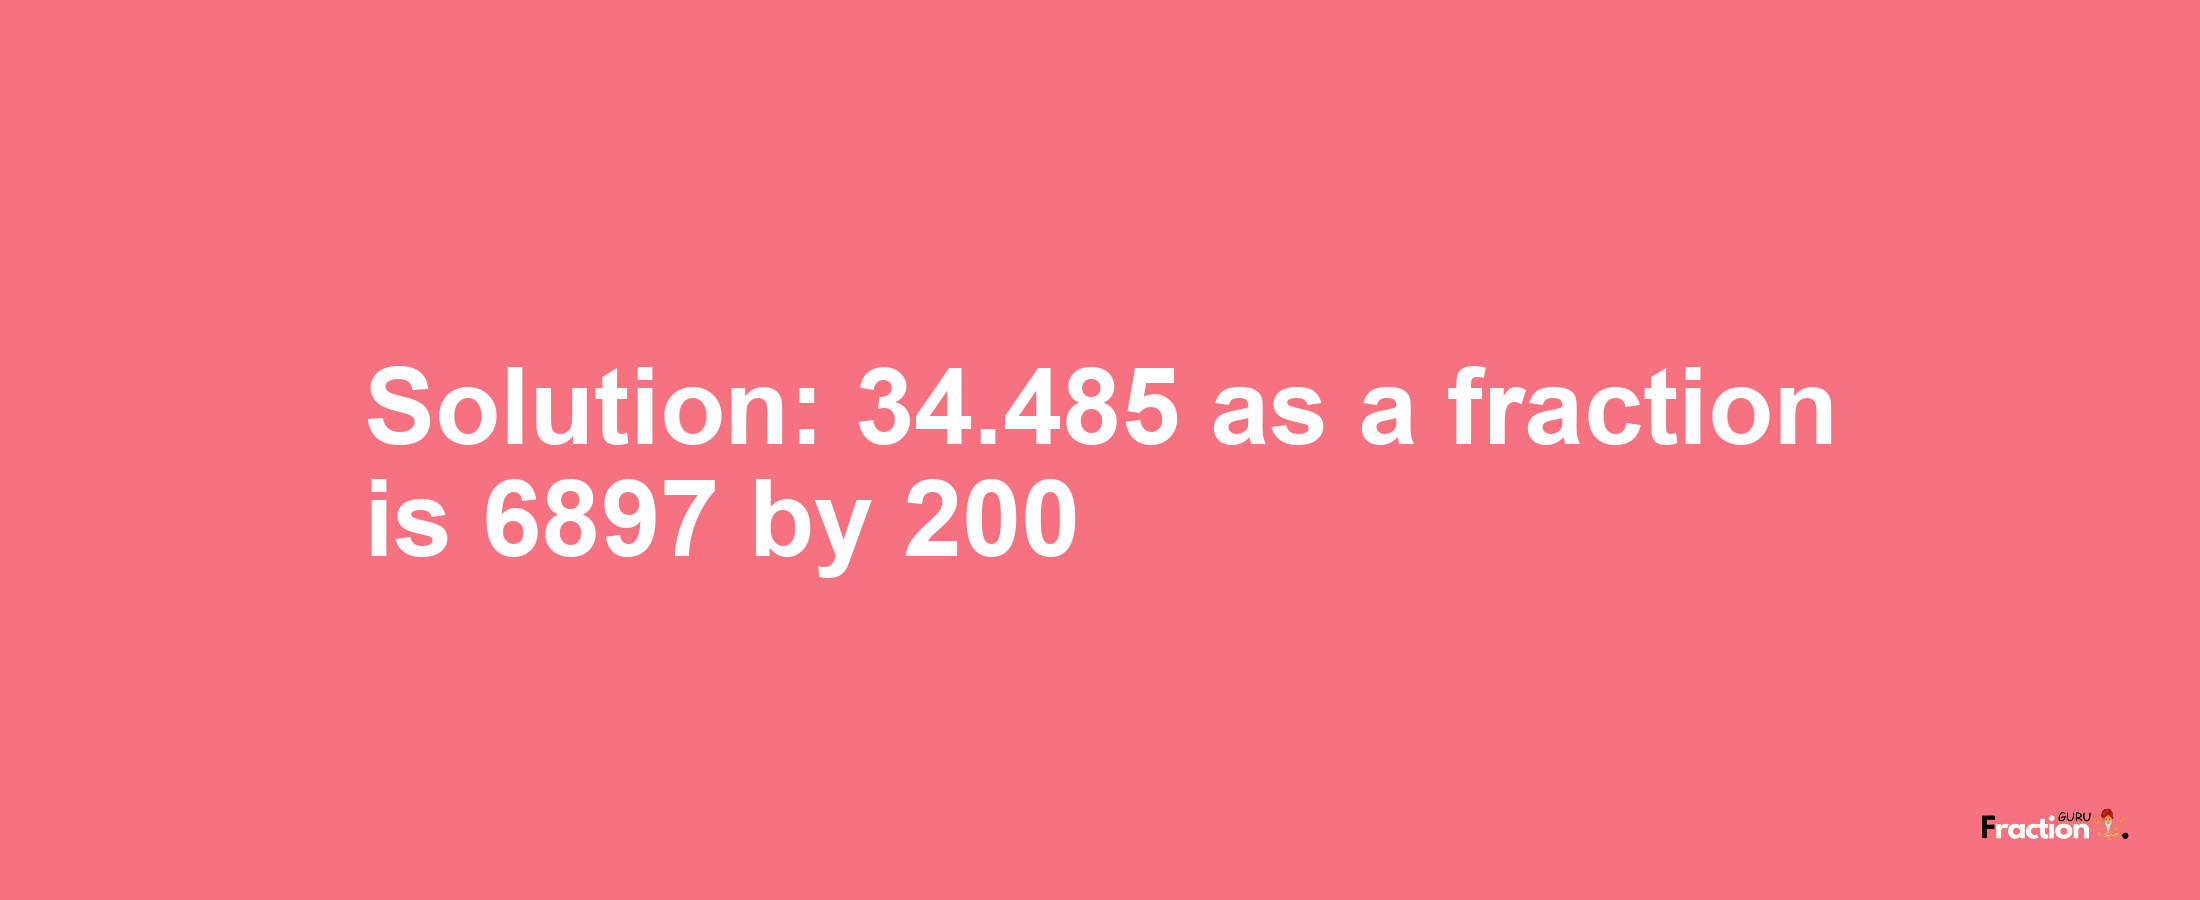 Solution:34.485 as a fraction is 6897/200